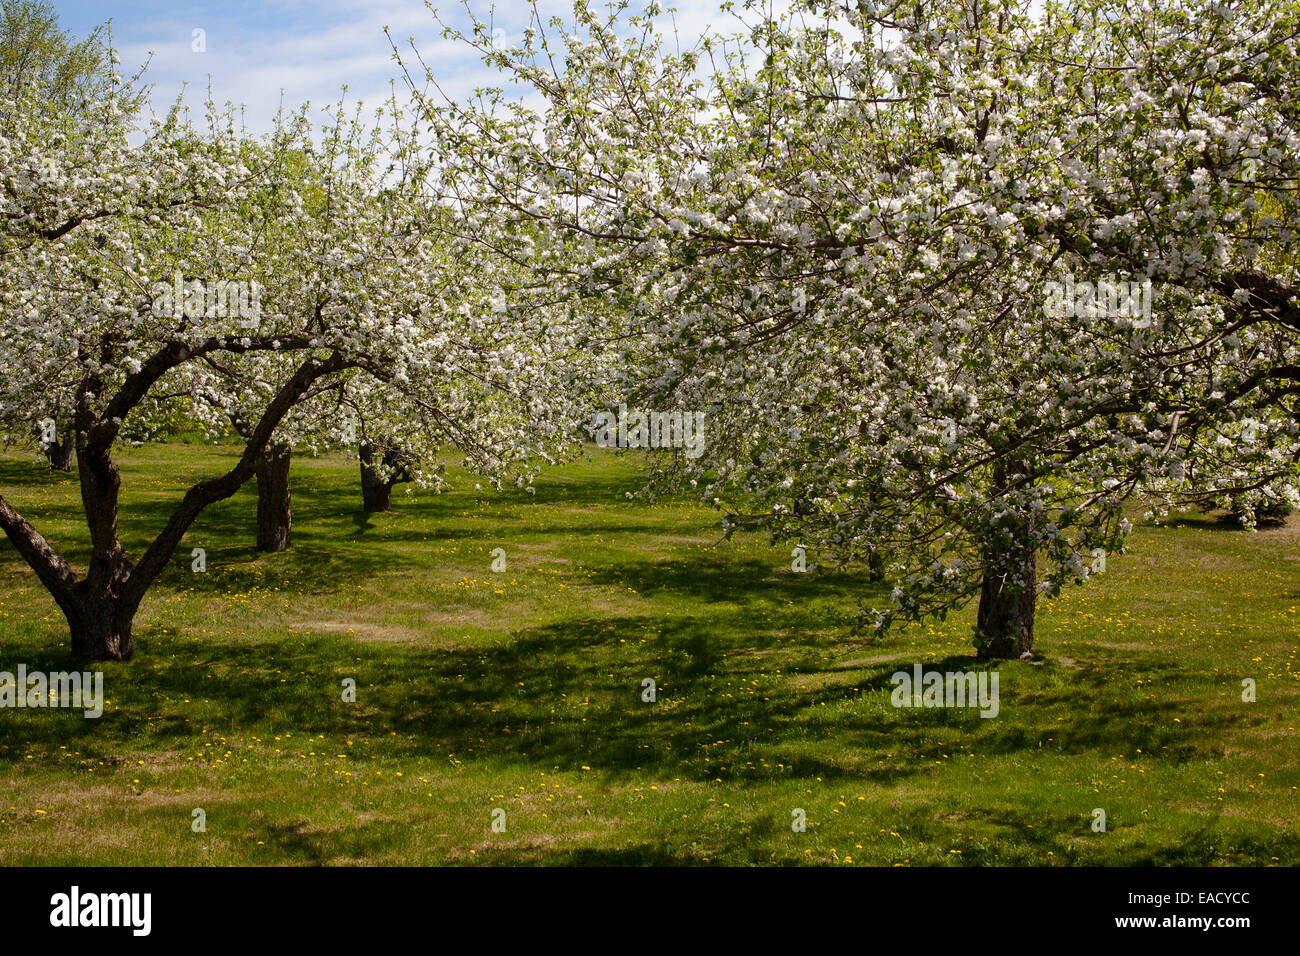 Orchard, Apple trees (Malus domestica) in blossom in spring, Bromont, Eastern Townships, Quebec Province, Canada Stock Photo